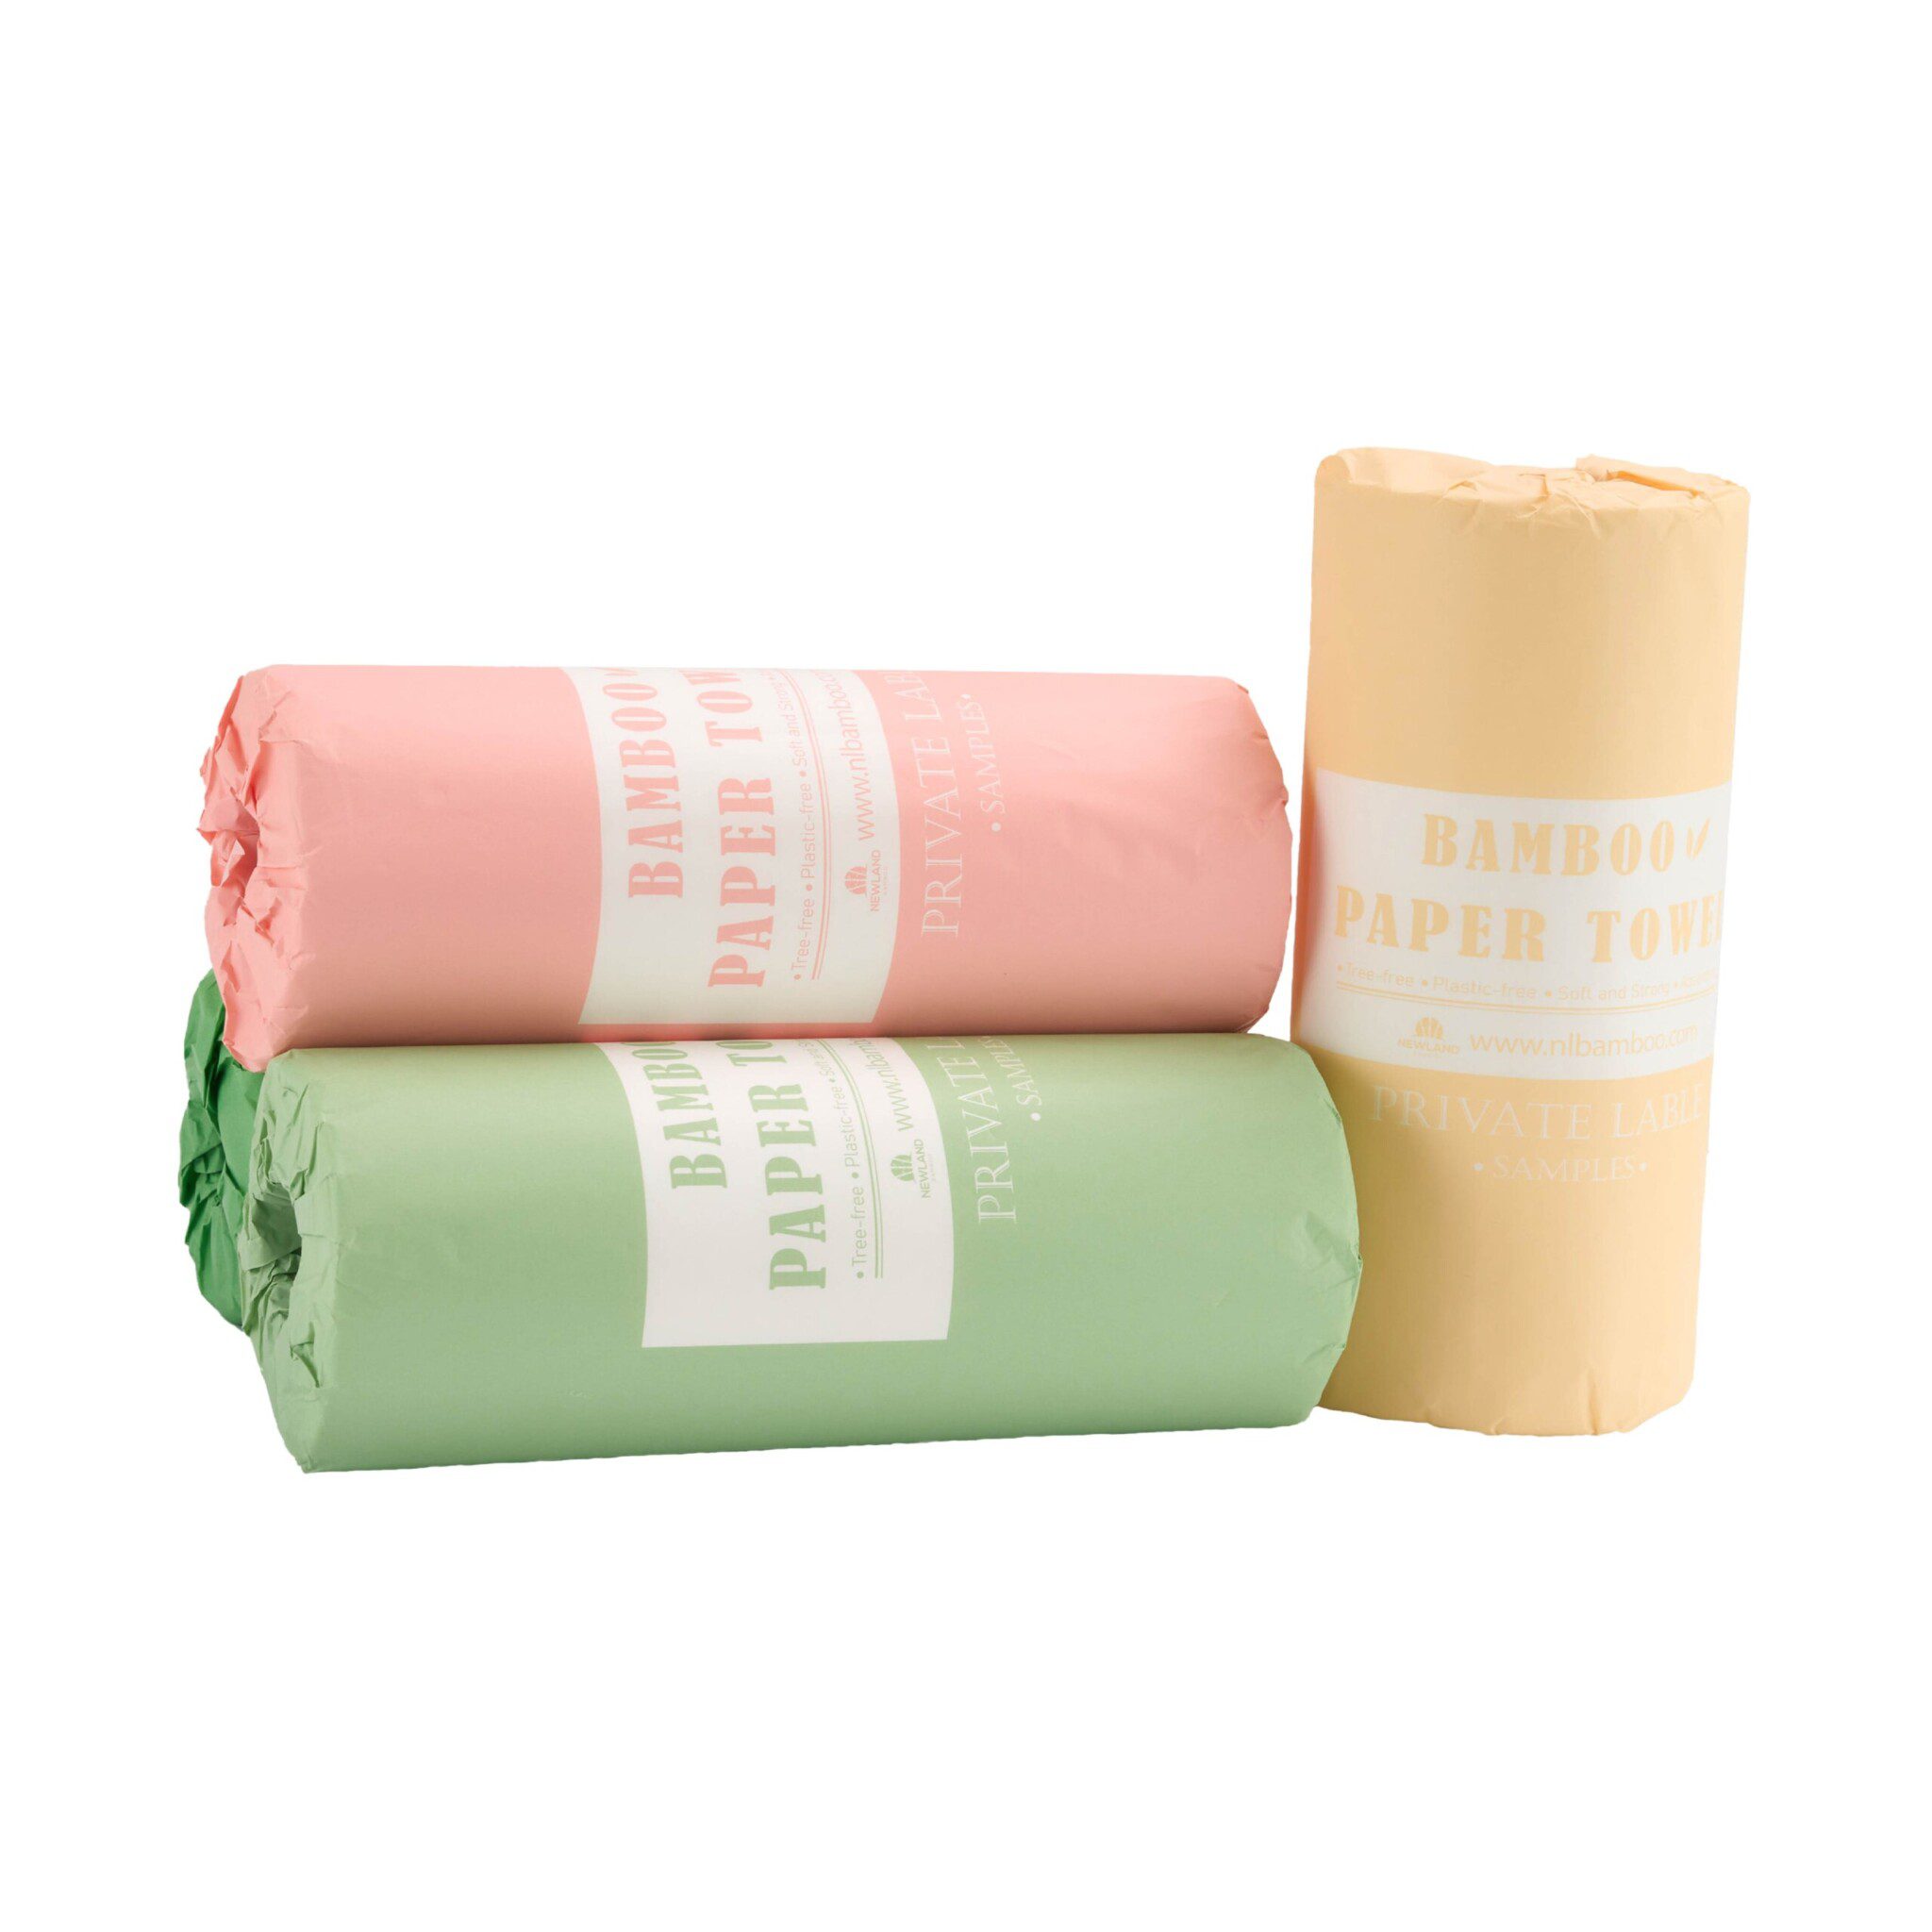 Private Label Bamboo Paper Towels